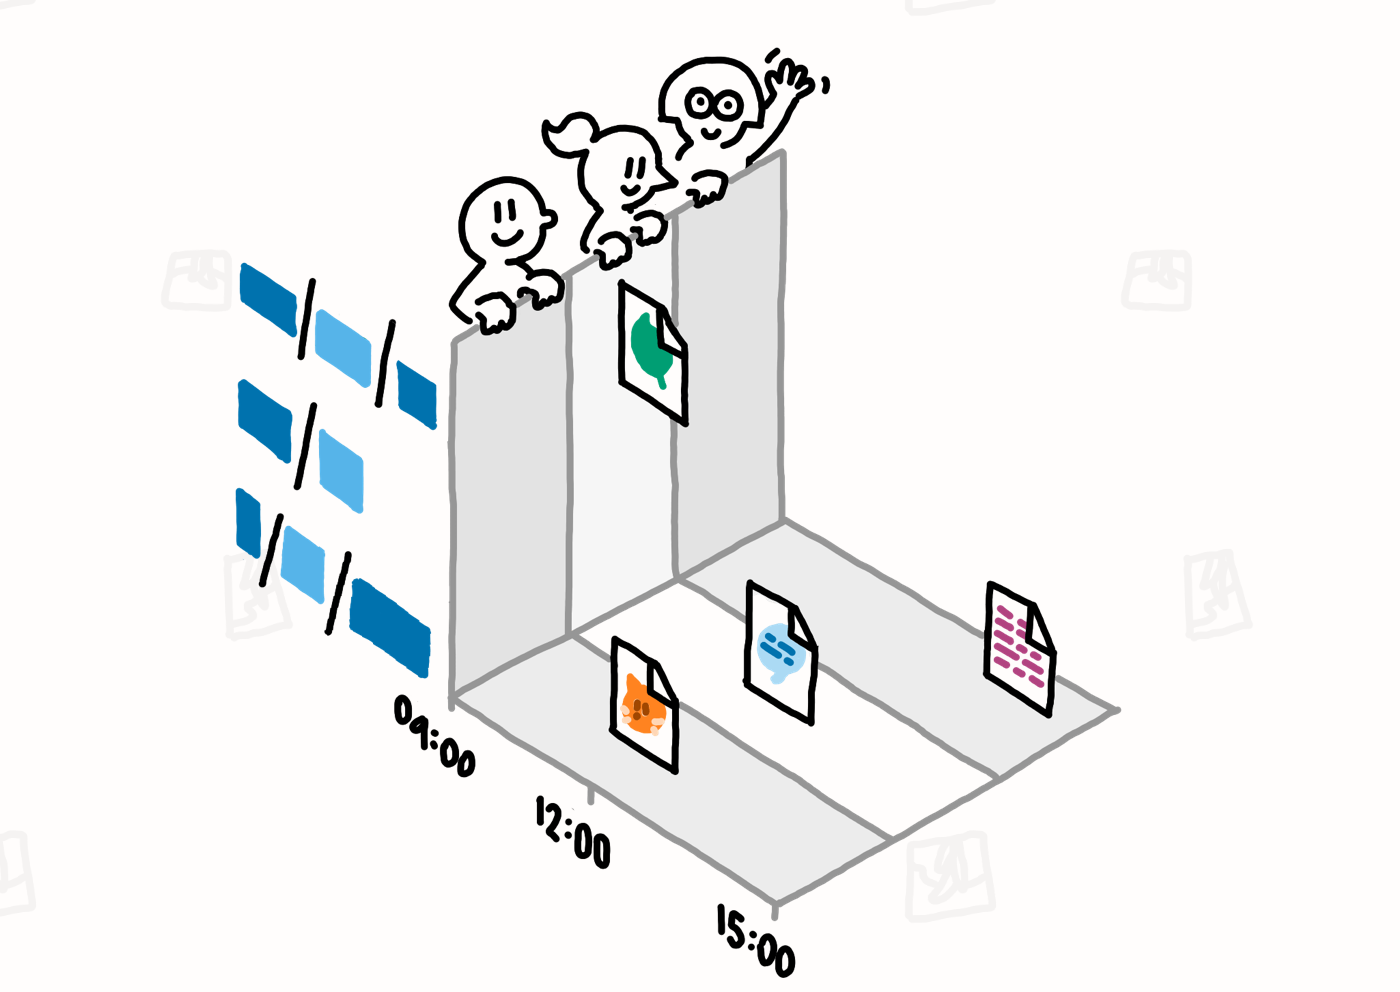 A drawing from the Willow website, visualizing the three dimensions of a namespace.